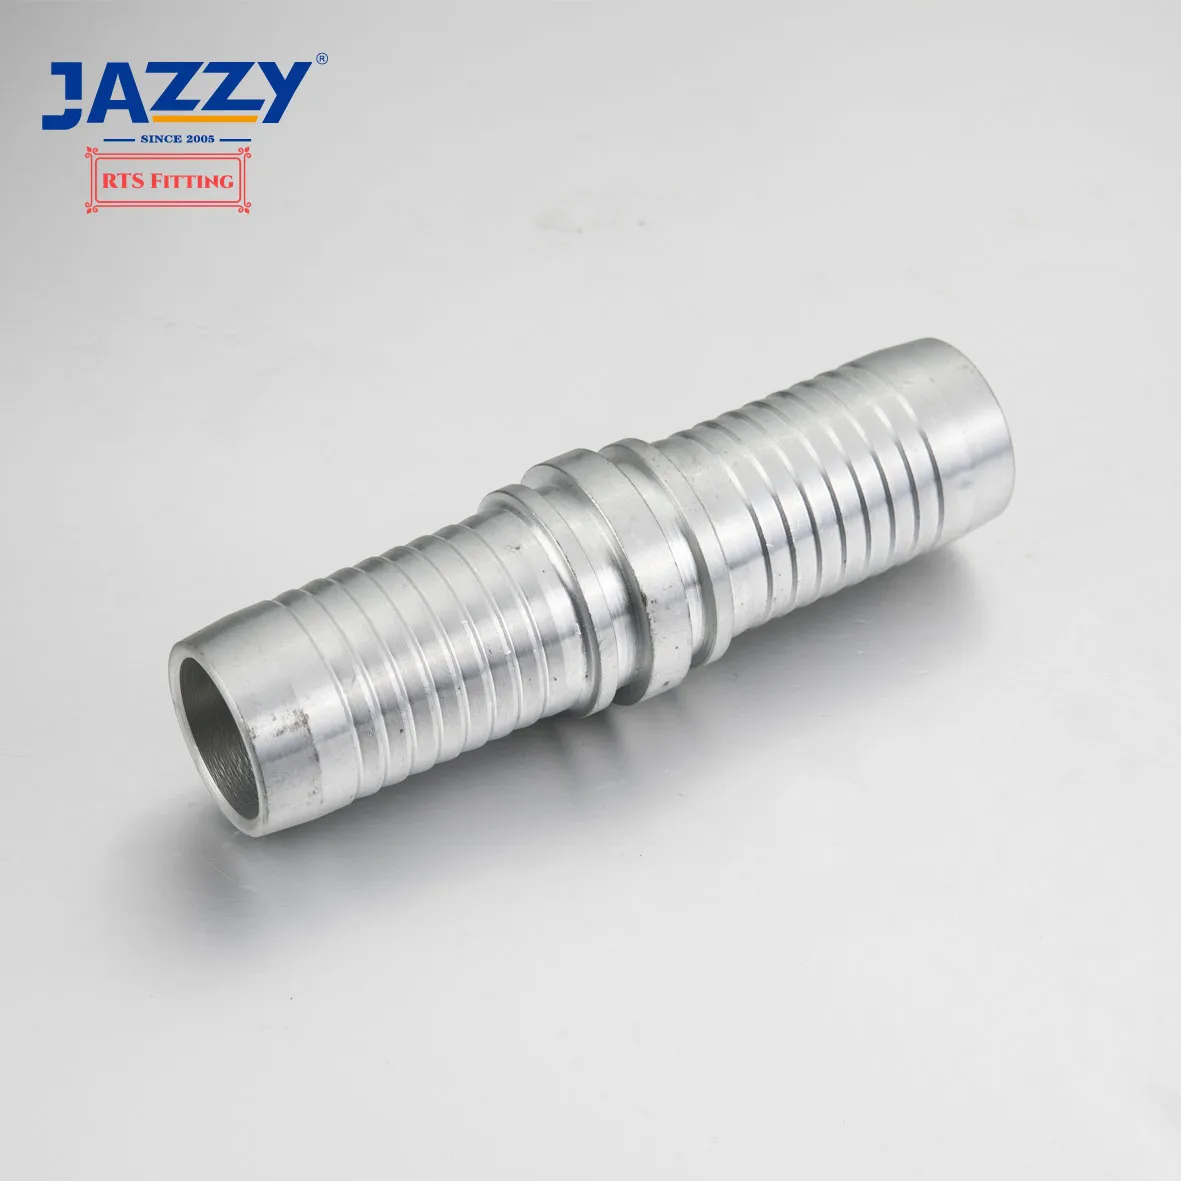 JAZZY excellent forged carbon steel double connector hydraulic ferrule hose fittings Hydraulic Fitting